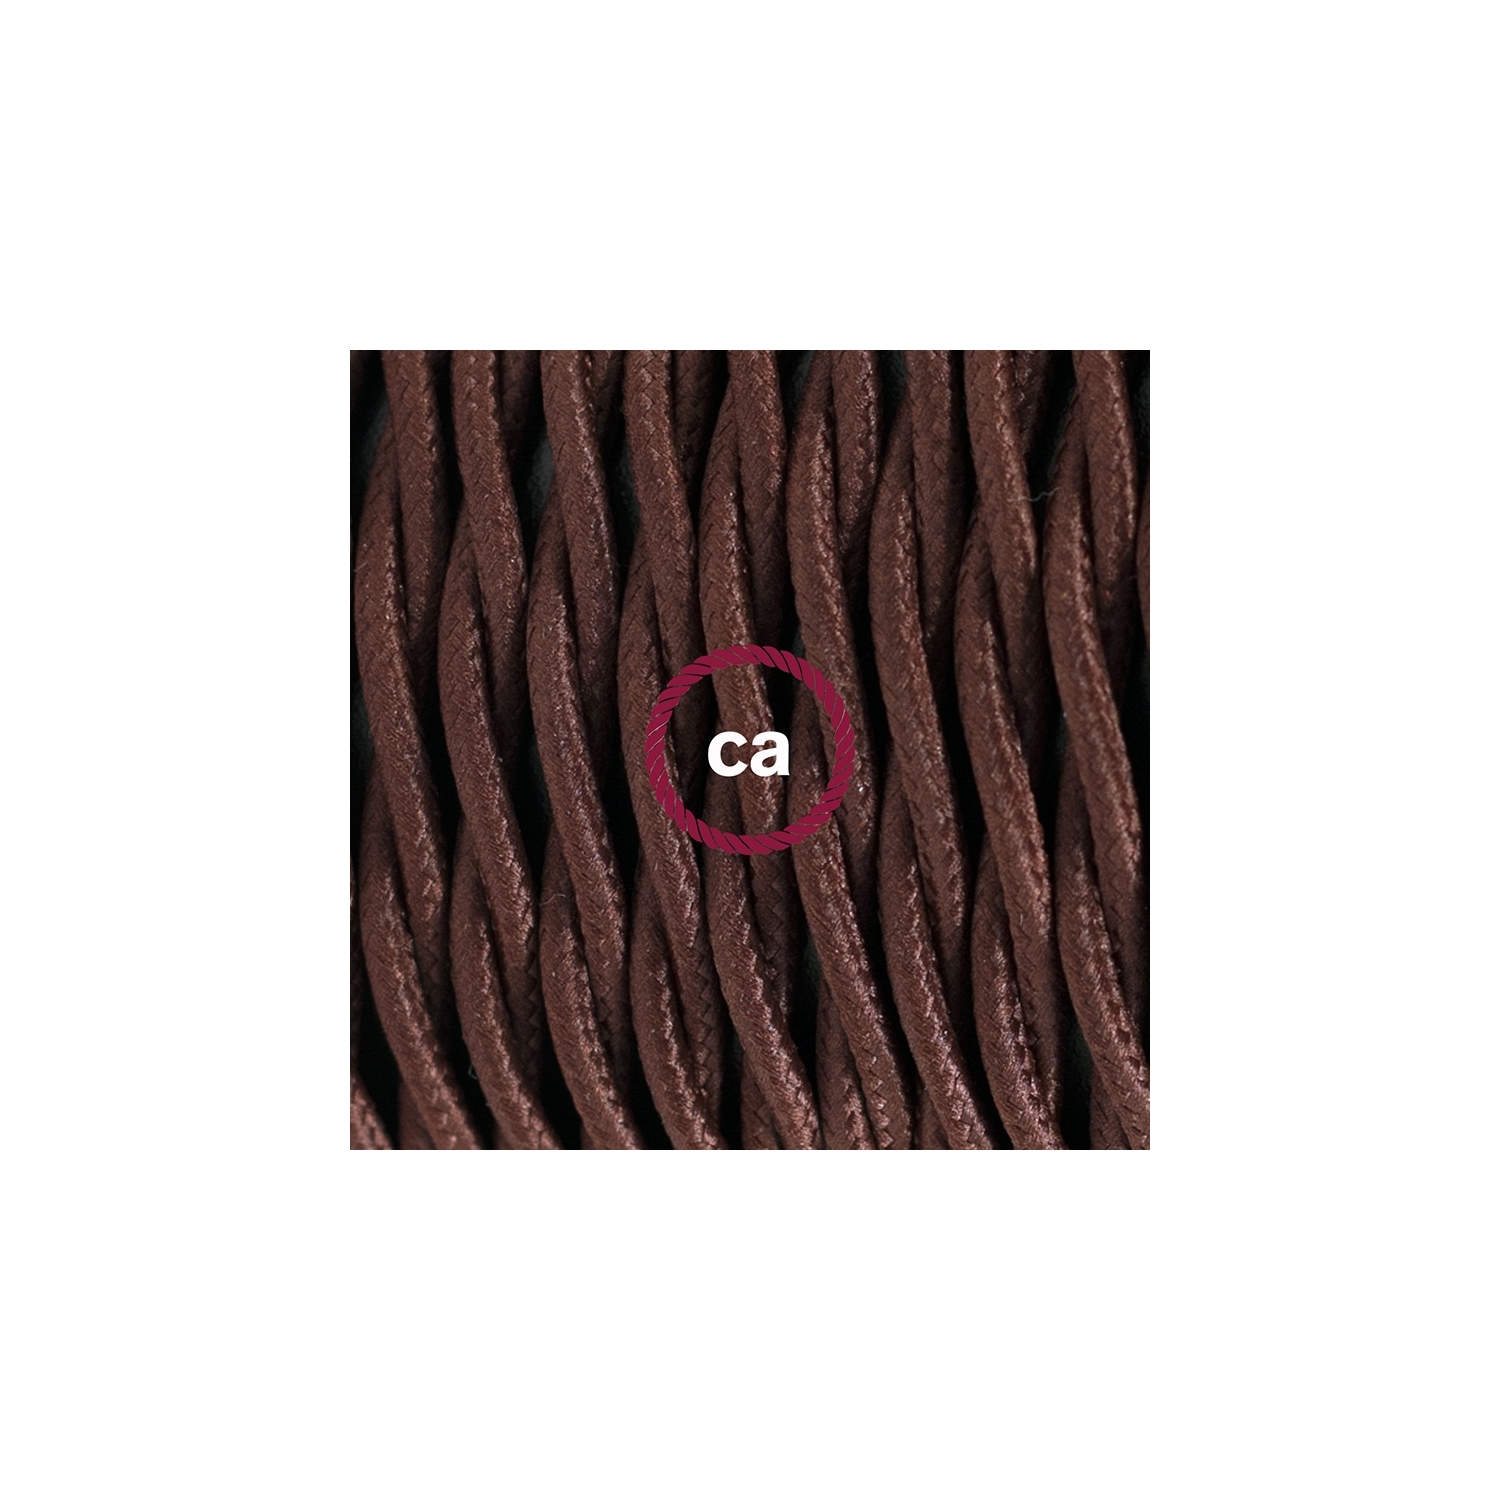 Create your TM13 Brown Rayon Snake and bring the light wherever you want.